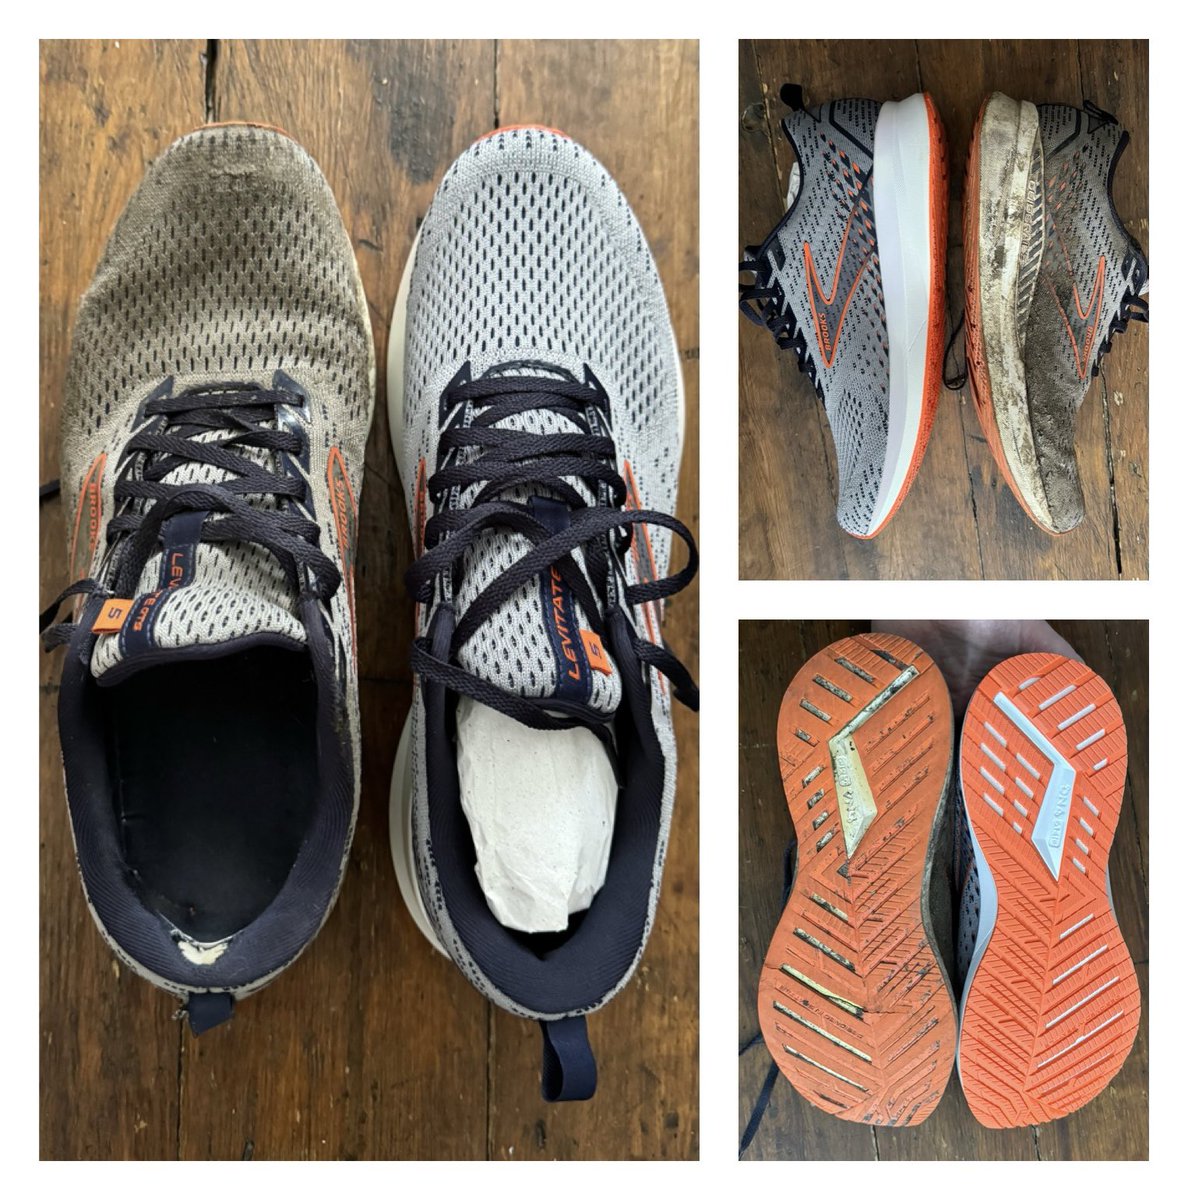 After 7 marathons, over 50 parkruns and who knows how far in training, a new pair of trainers was perhaps overdue… 🏃‍♂️